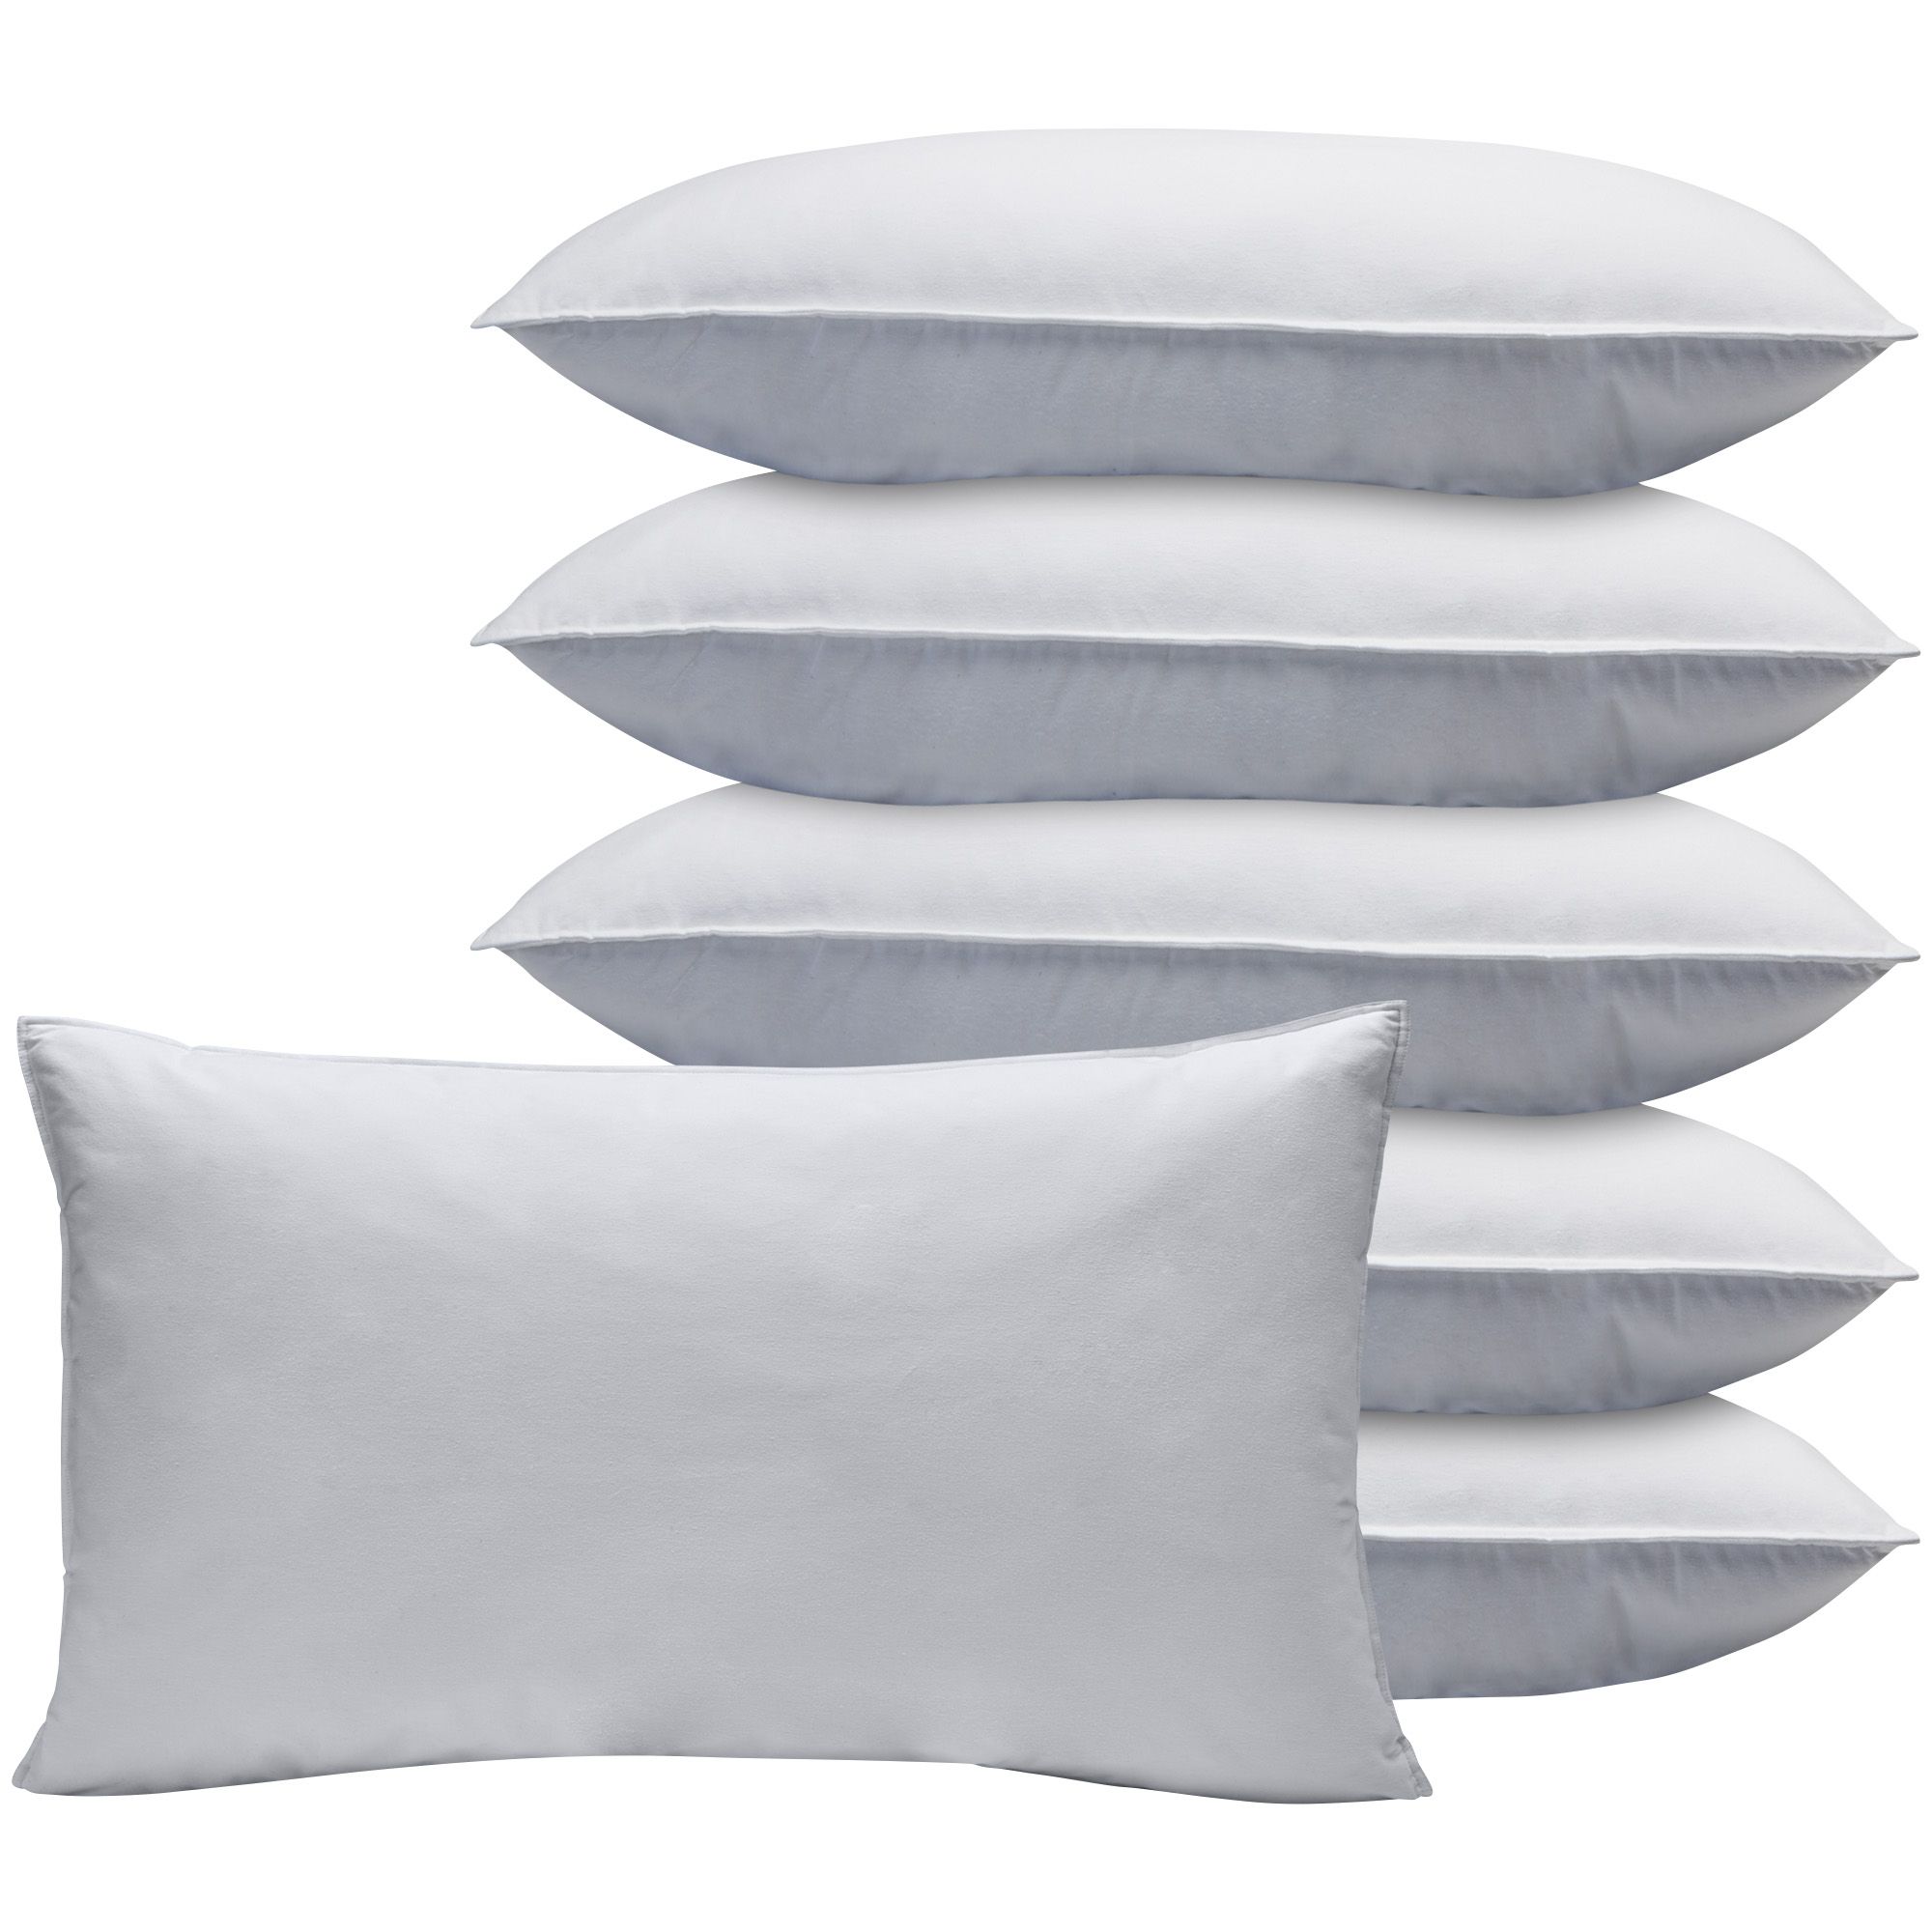 St. James Home Cotton Silver Duck Feather Pillows (Set of 4) - On